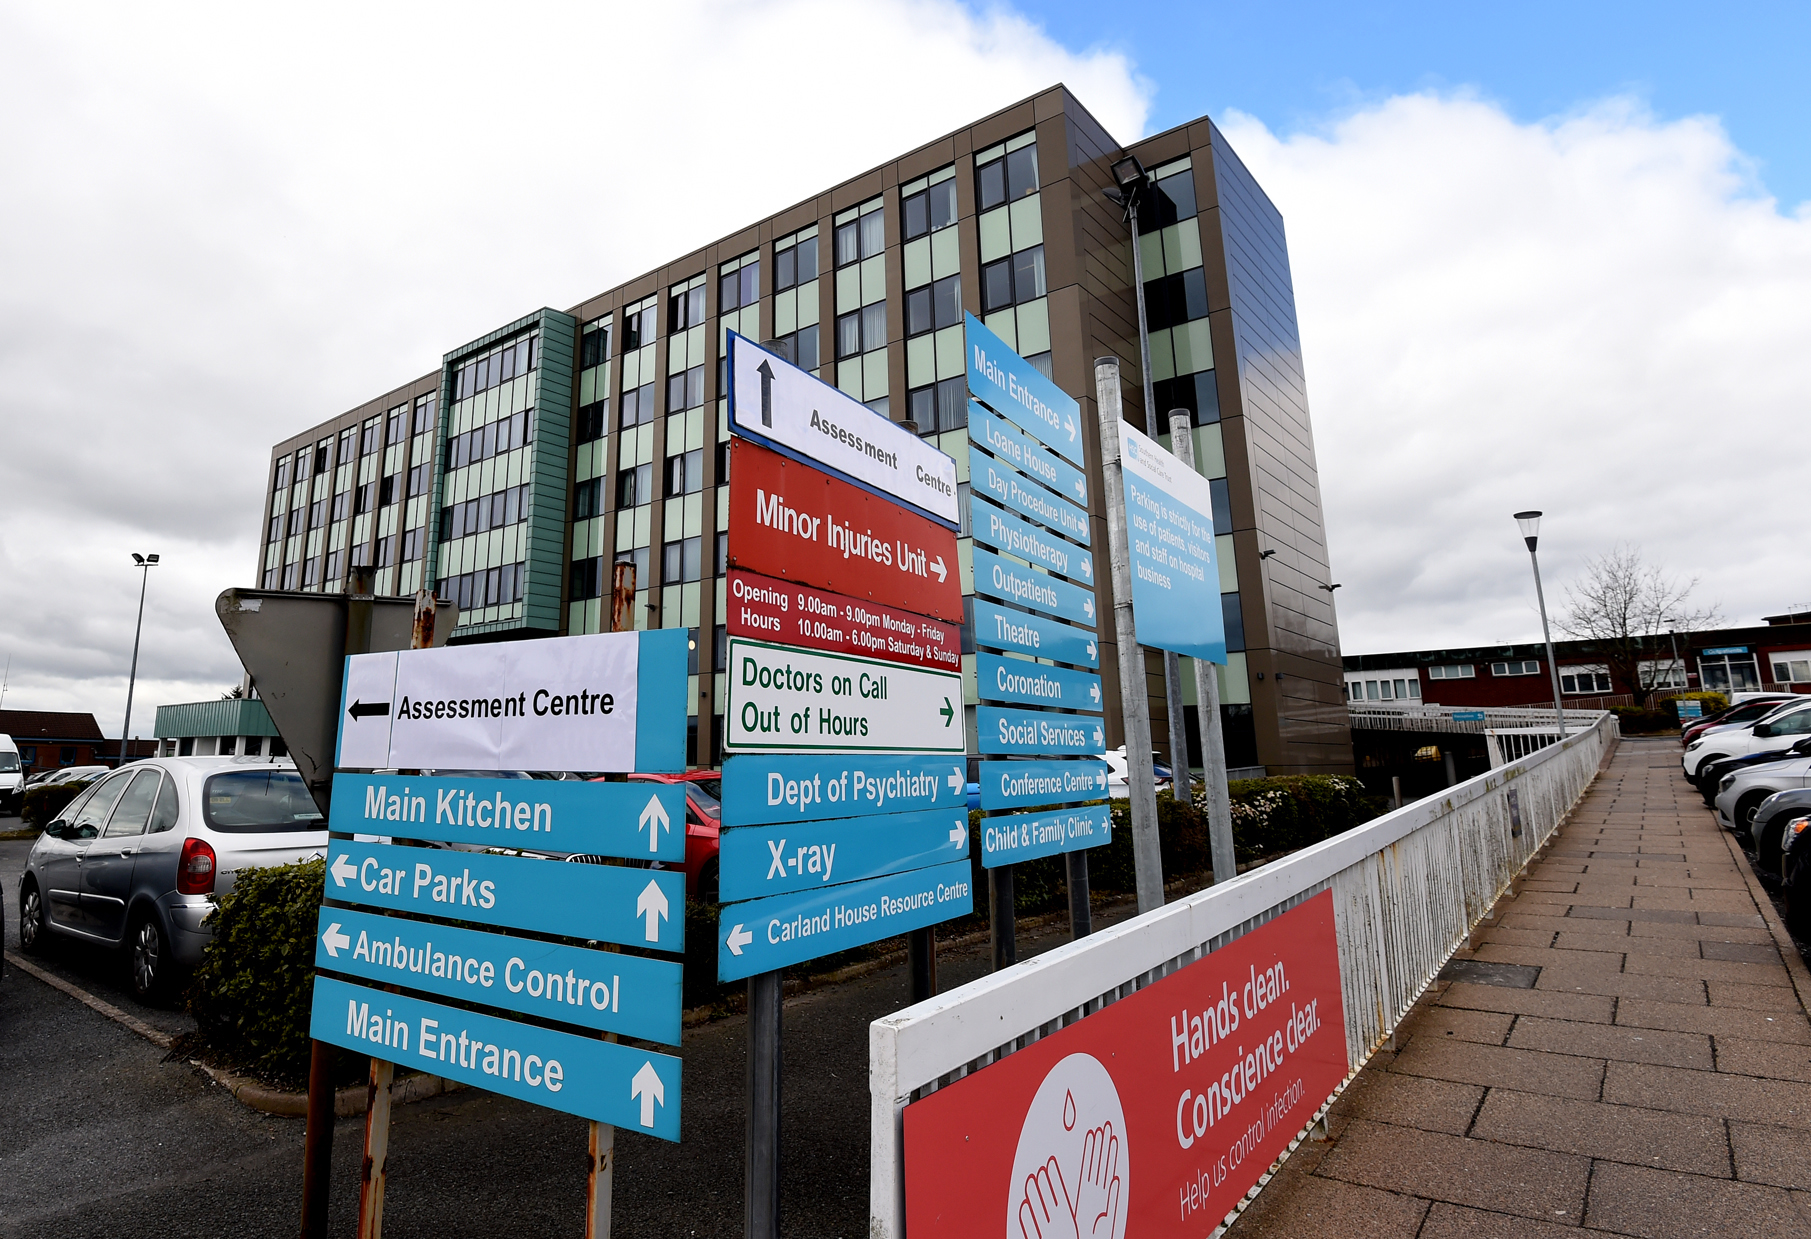 Dungannon doctor on call stays closed  as health crisis deepens